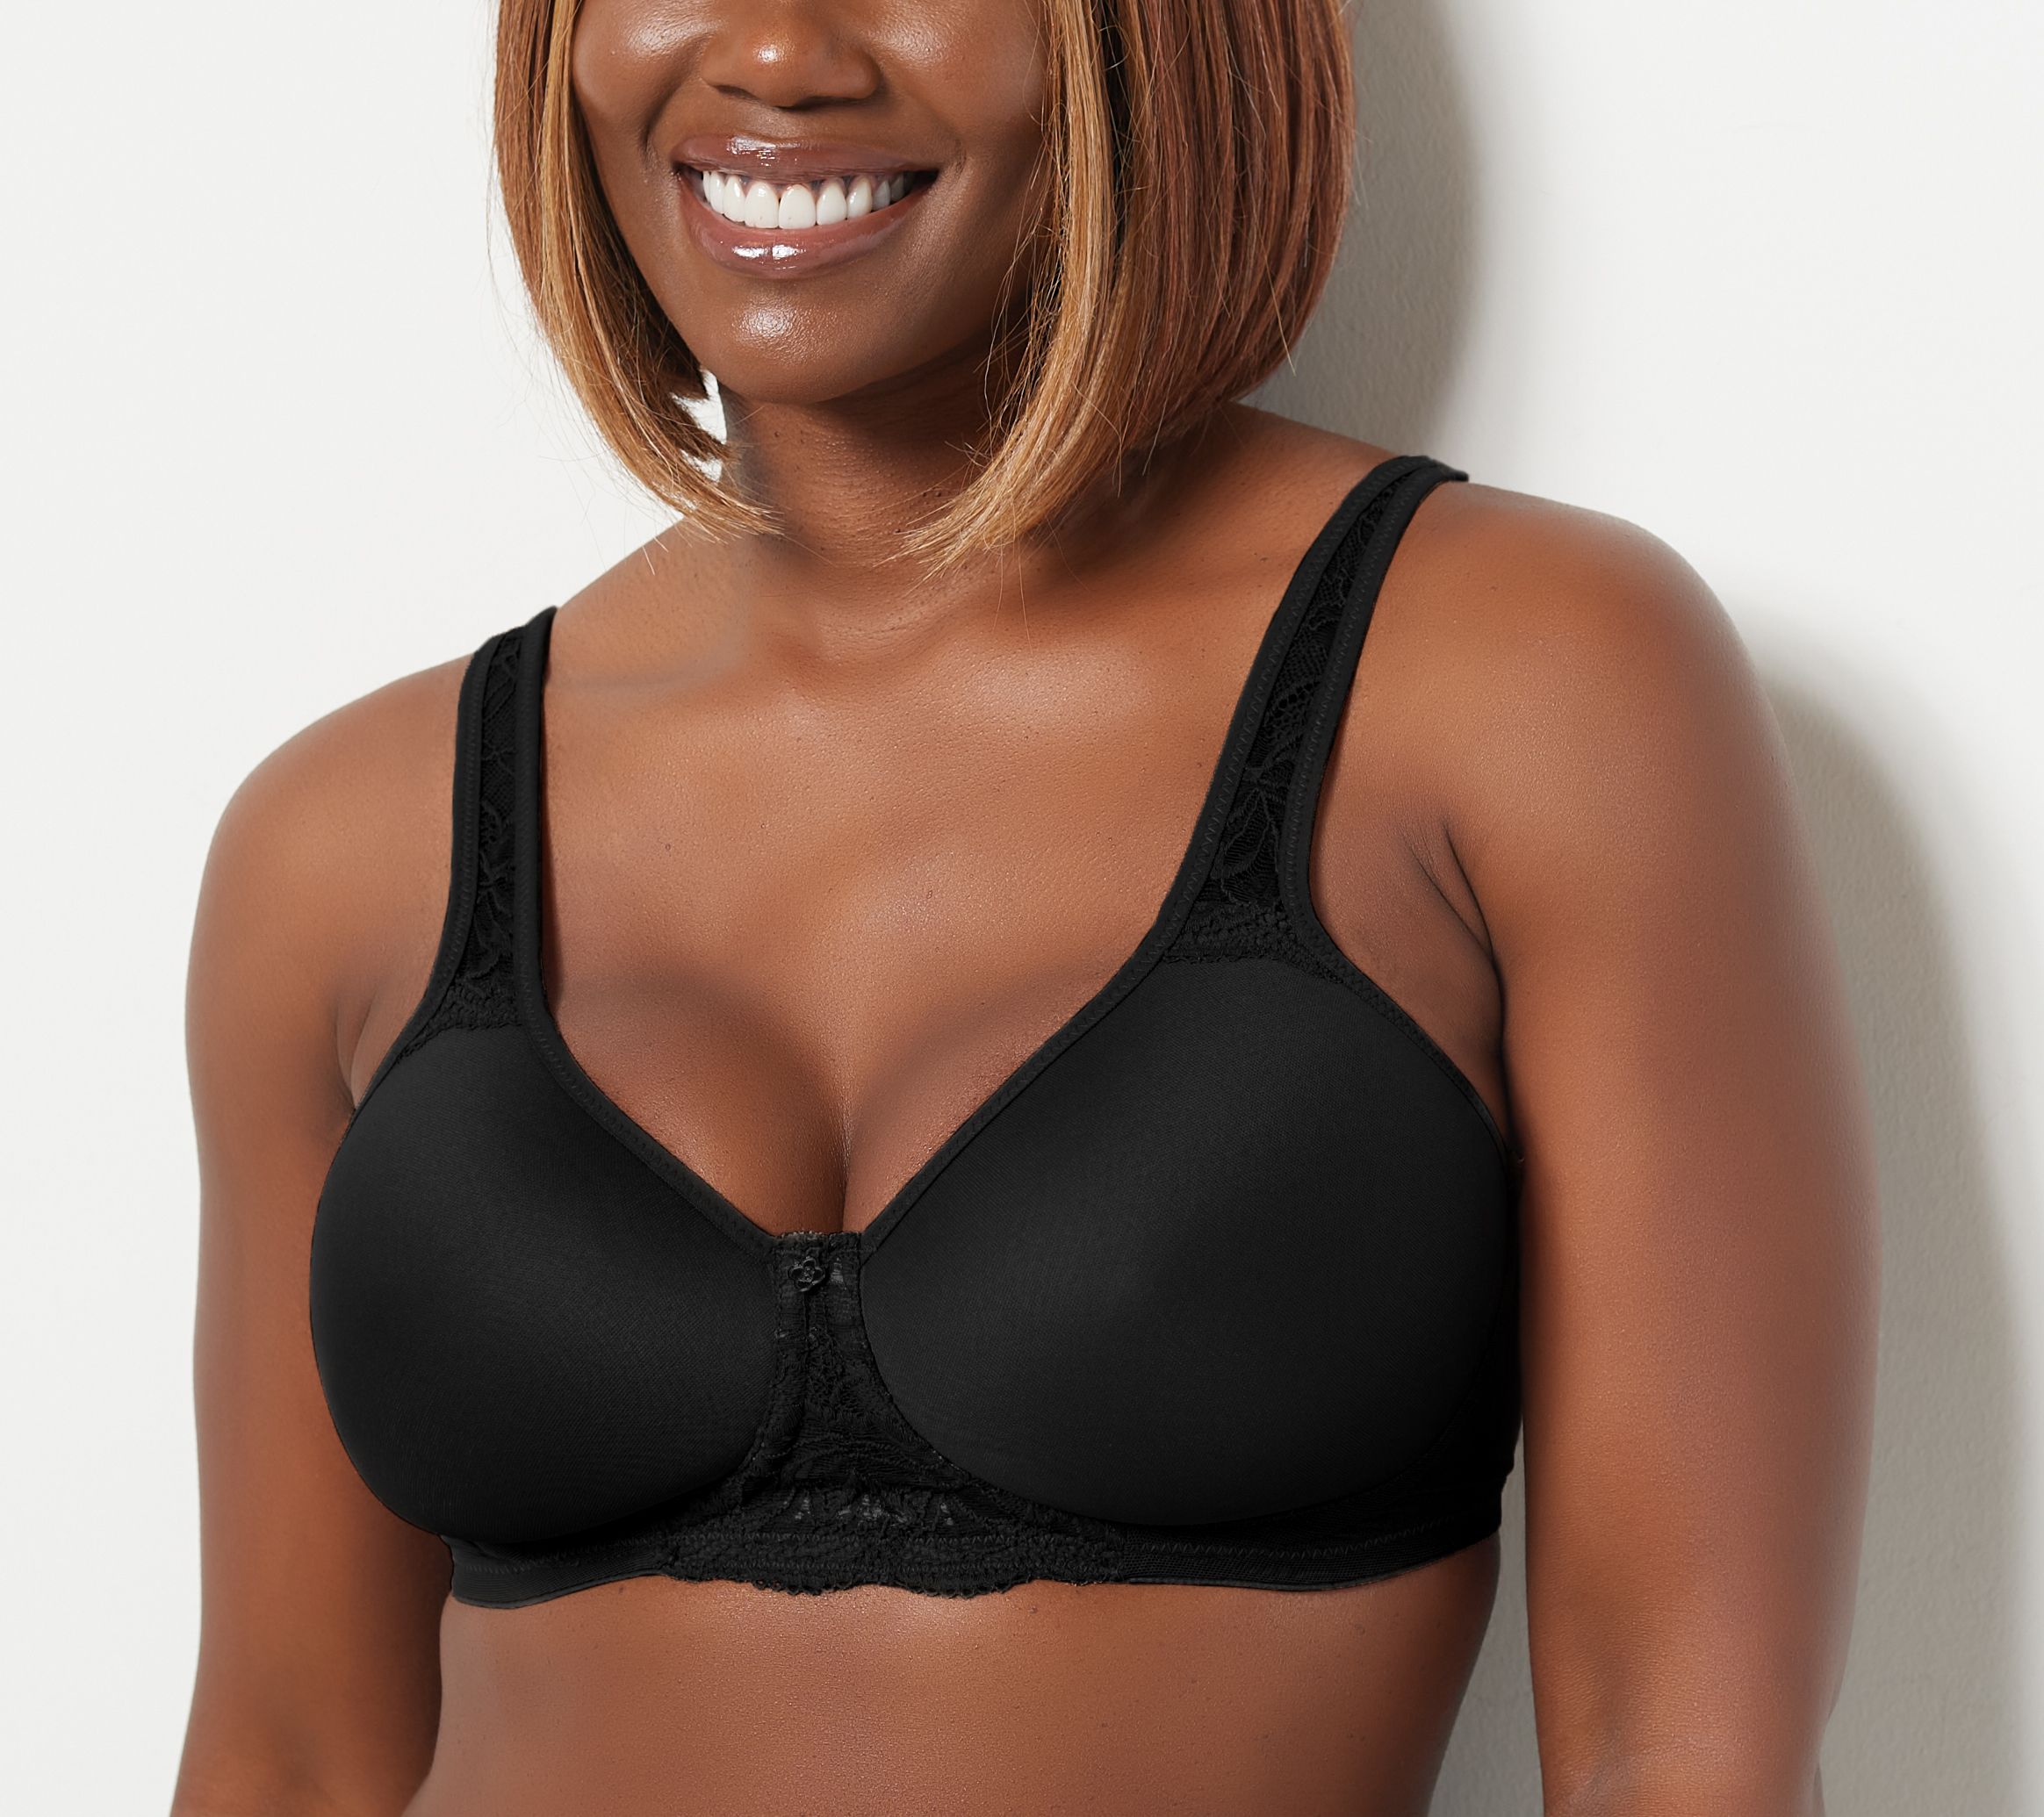  Customer reviews: Breezies Smooth Radiance Unlined Underwire  Support Bra (Black, 40B)